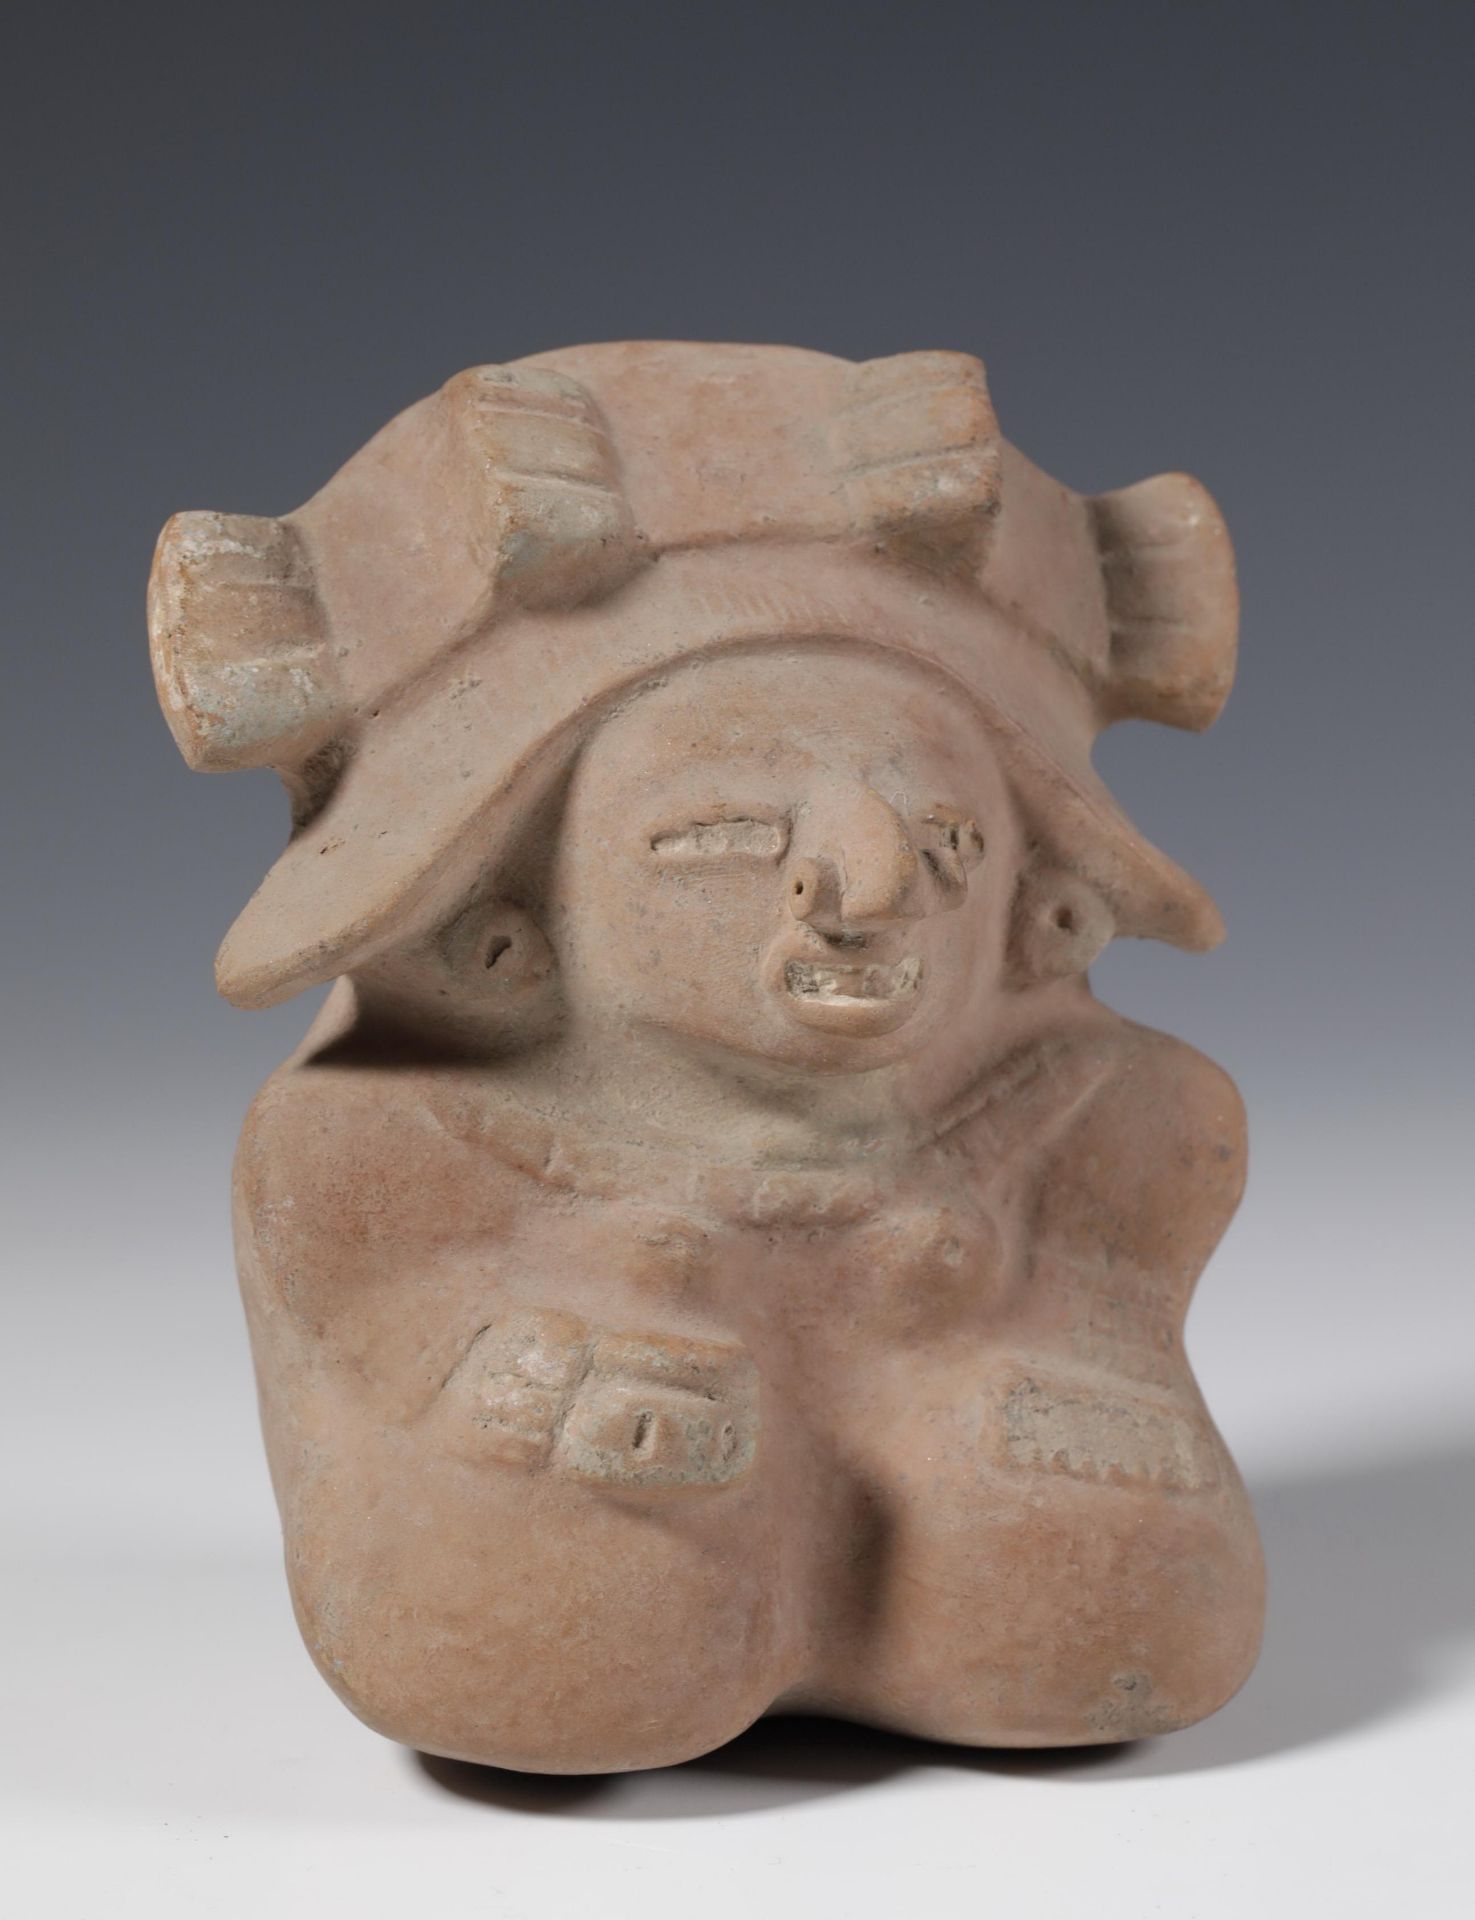 El Salvador, Classic Maya, molded buff brown pottery seated figure holding a bowl in her right hand, - Image 5 of 7